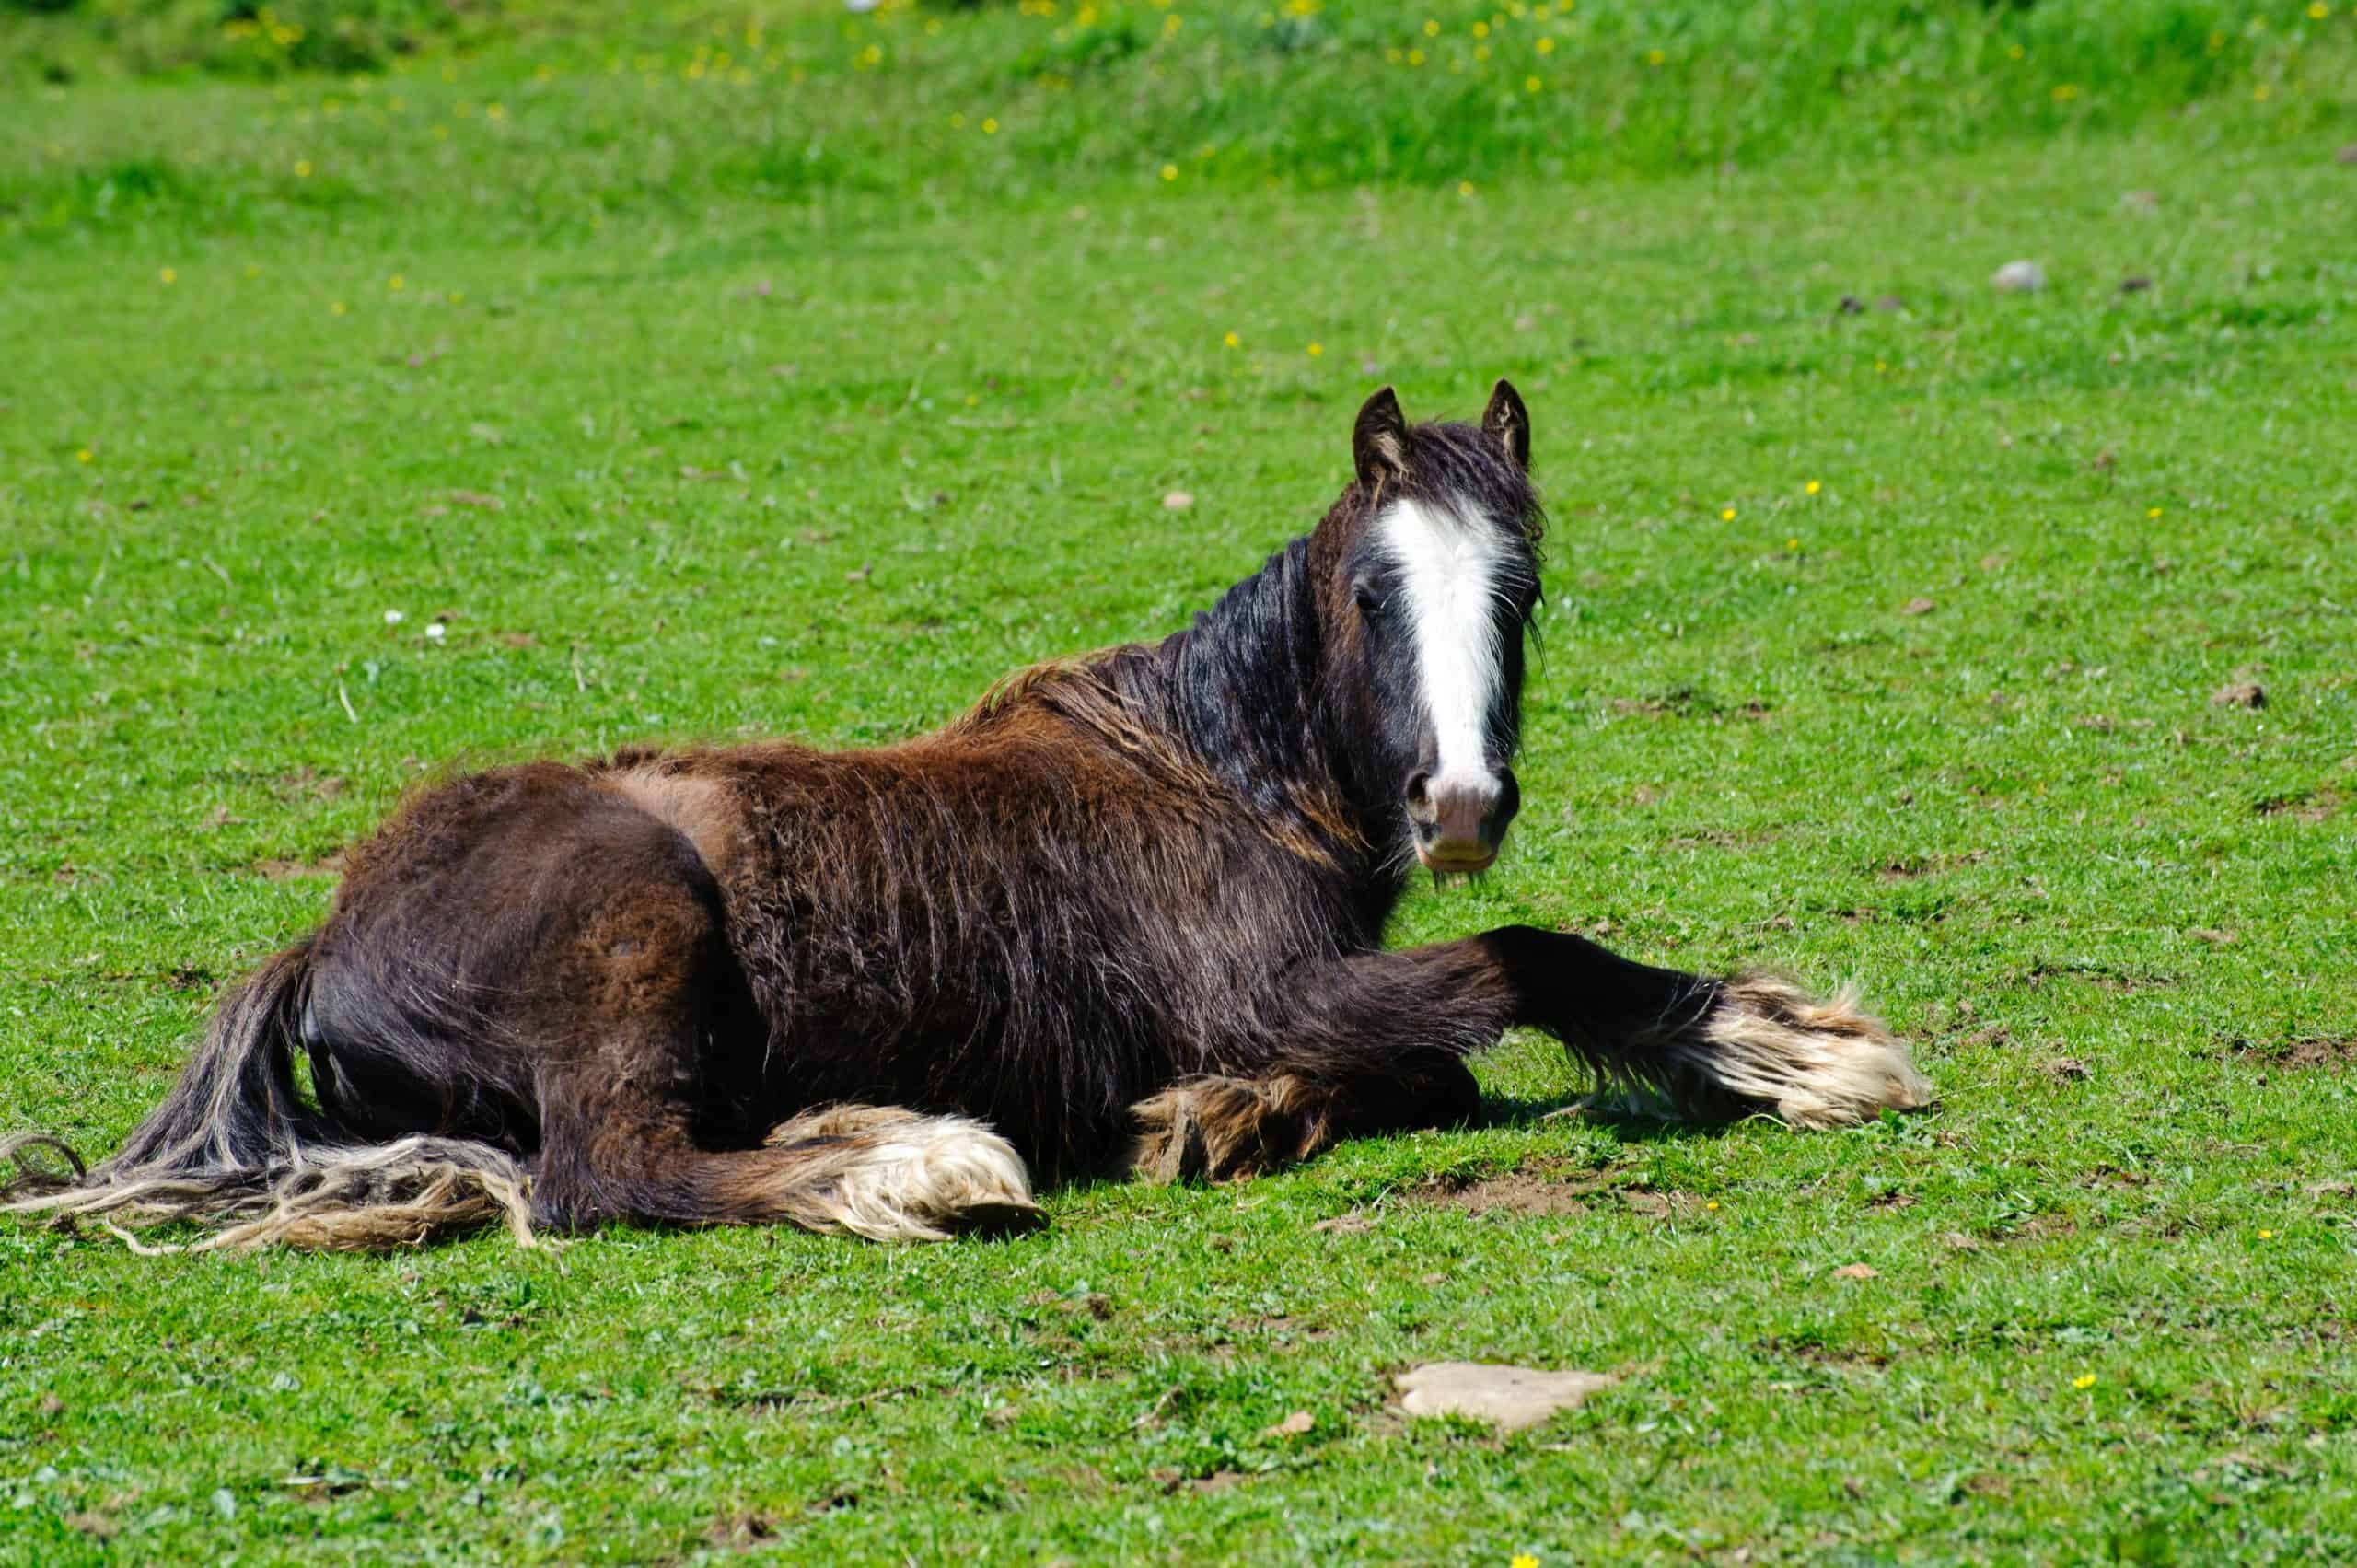 Rescued neglected horse resting and recovering in a green field